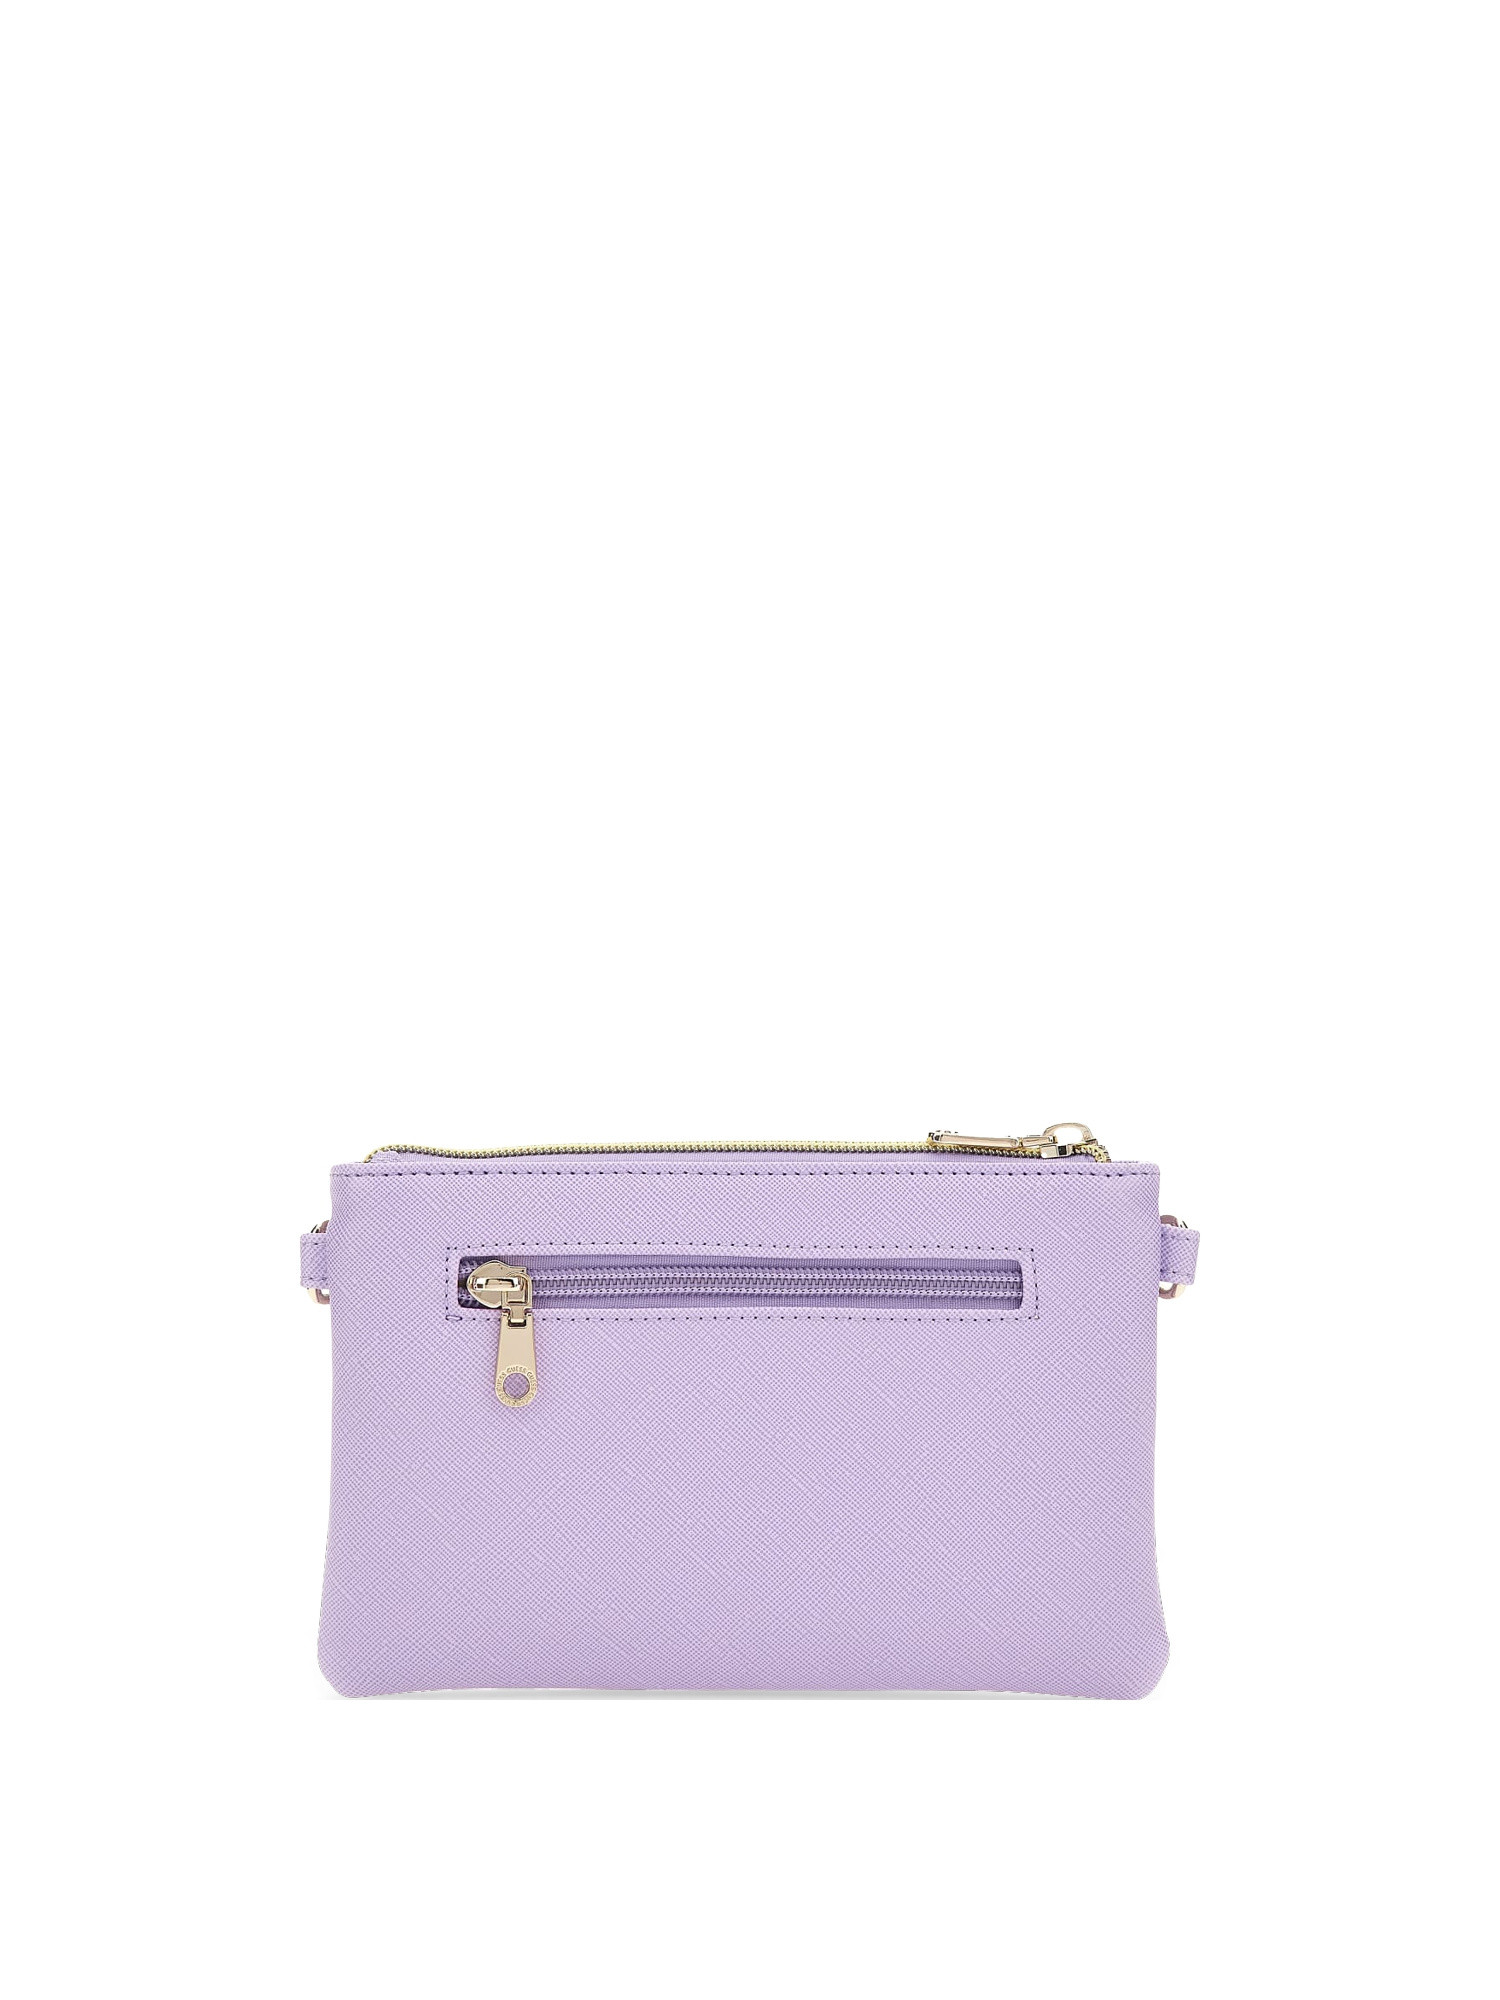 Guess - Pouch con logo, Viola lilla, large image number 1